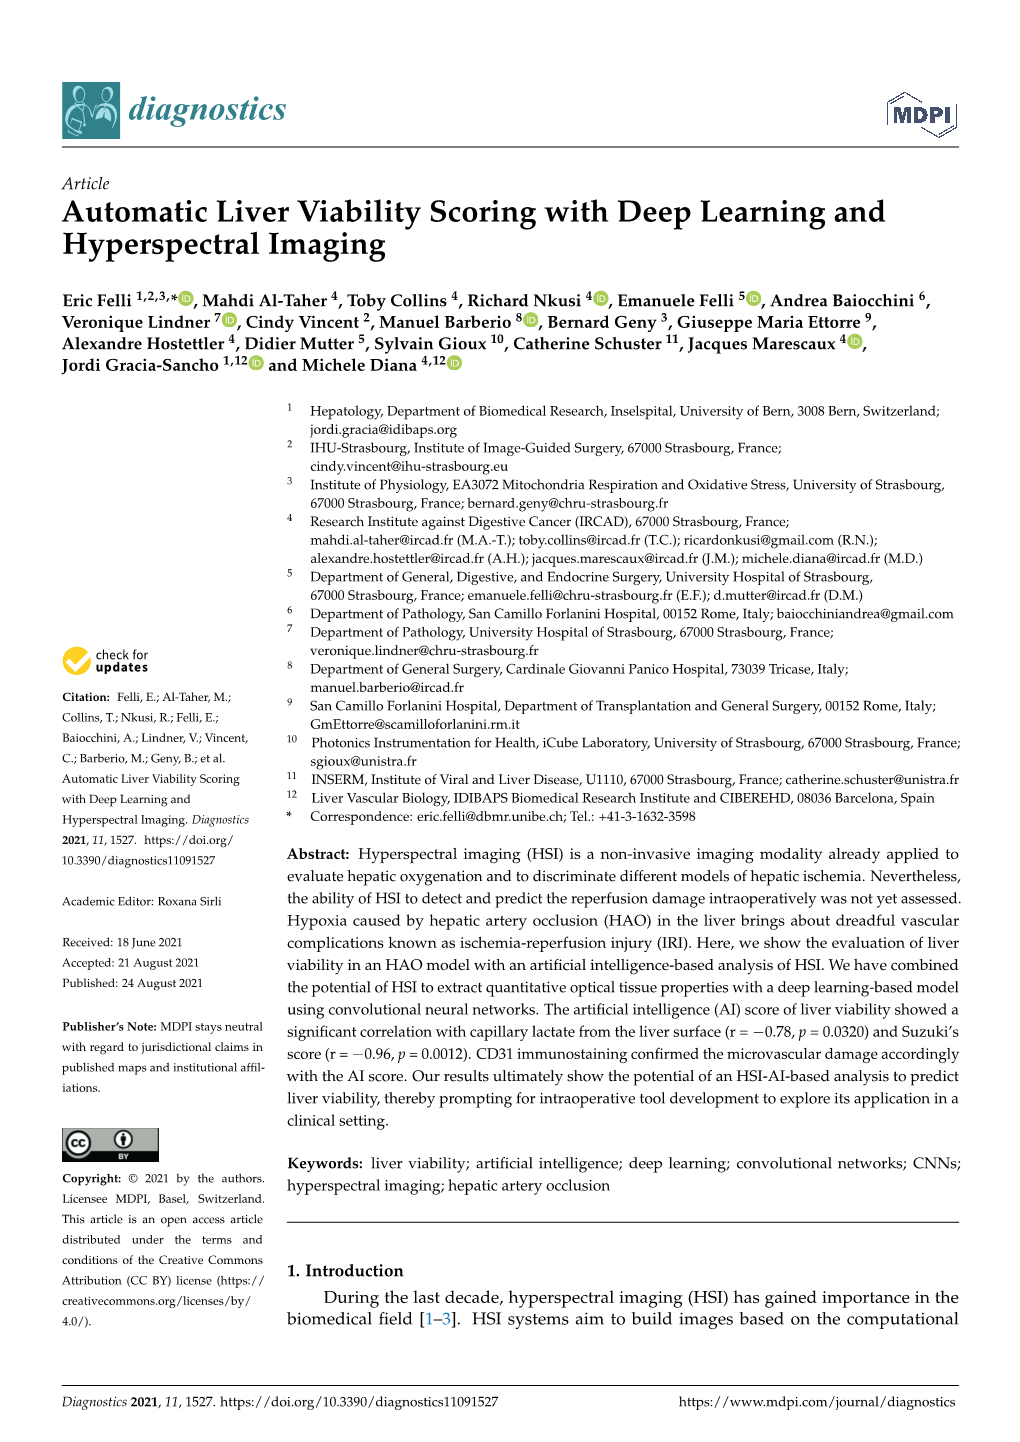 Automatic Liver Viability Scoring with Deep Learning and Hyperspectral Imaging